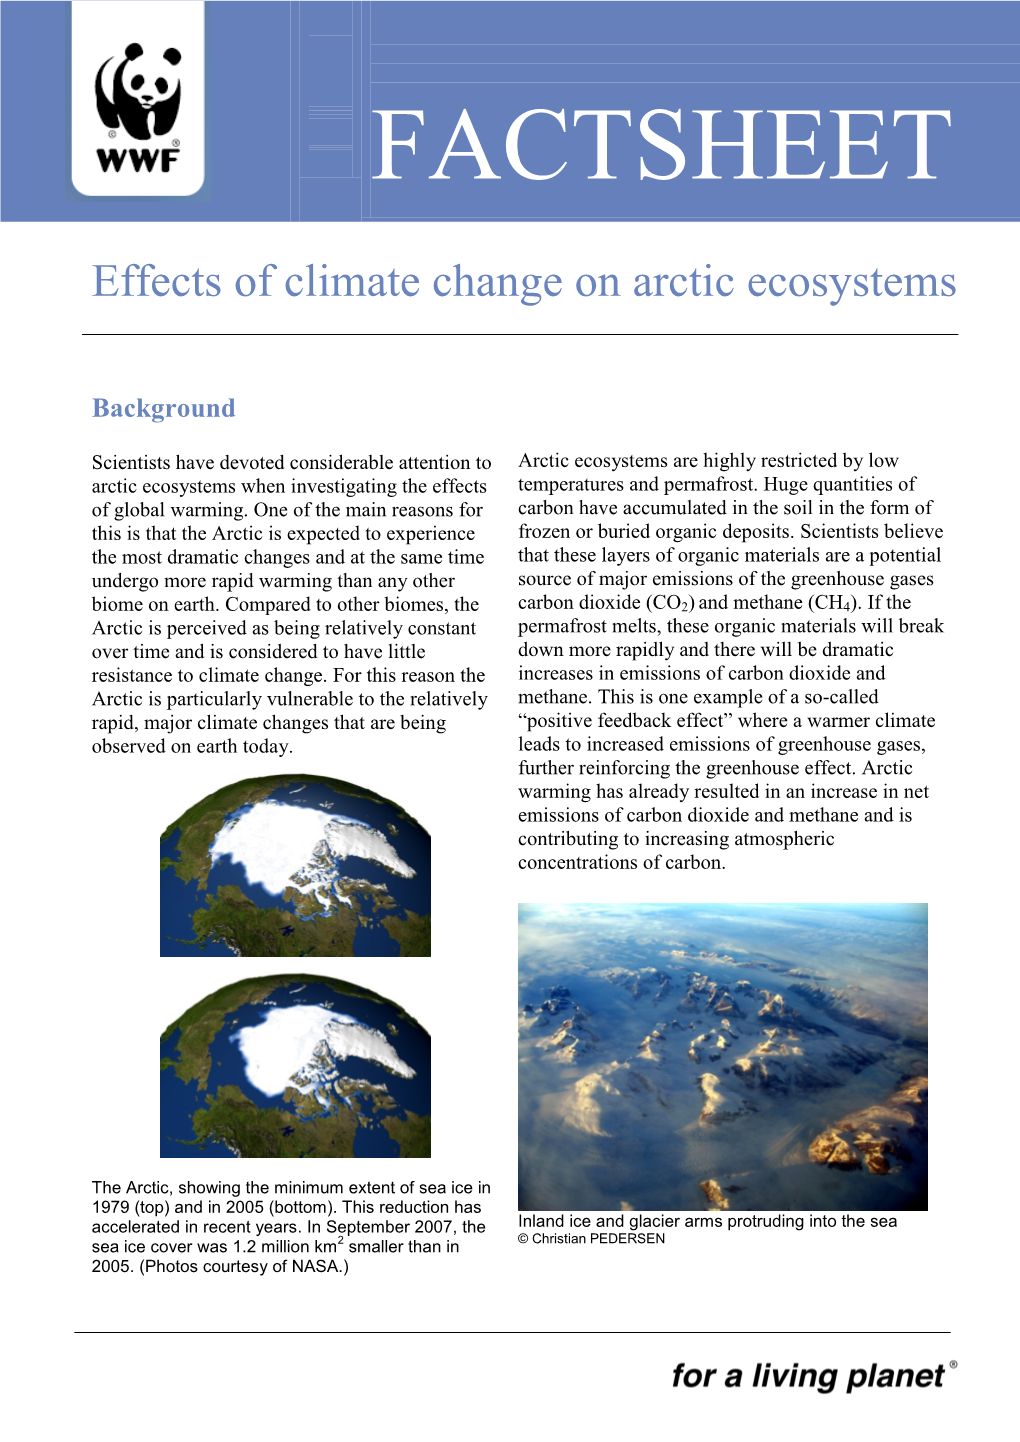 Effects of Climate Change on Arctic Ecosystems